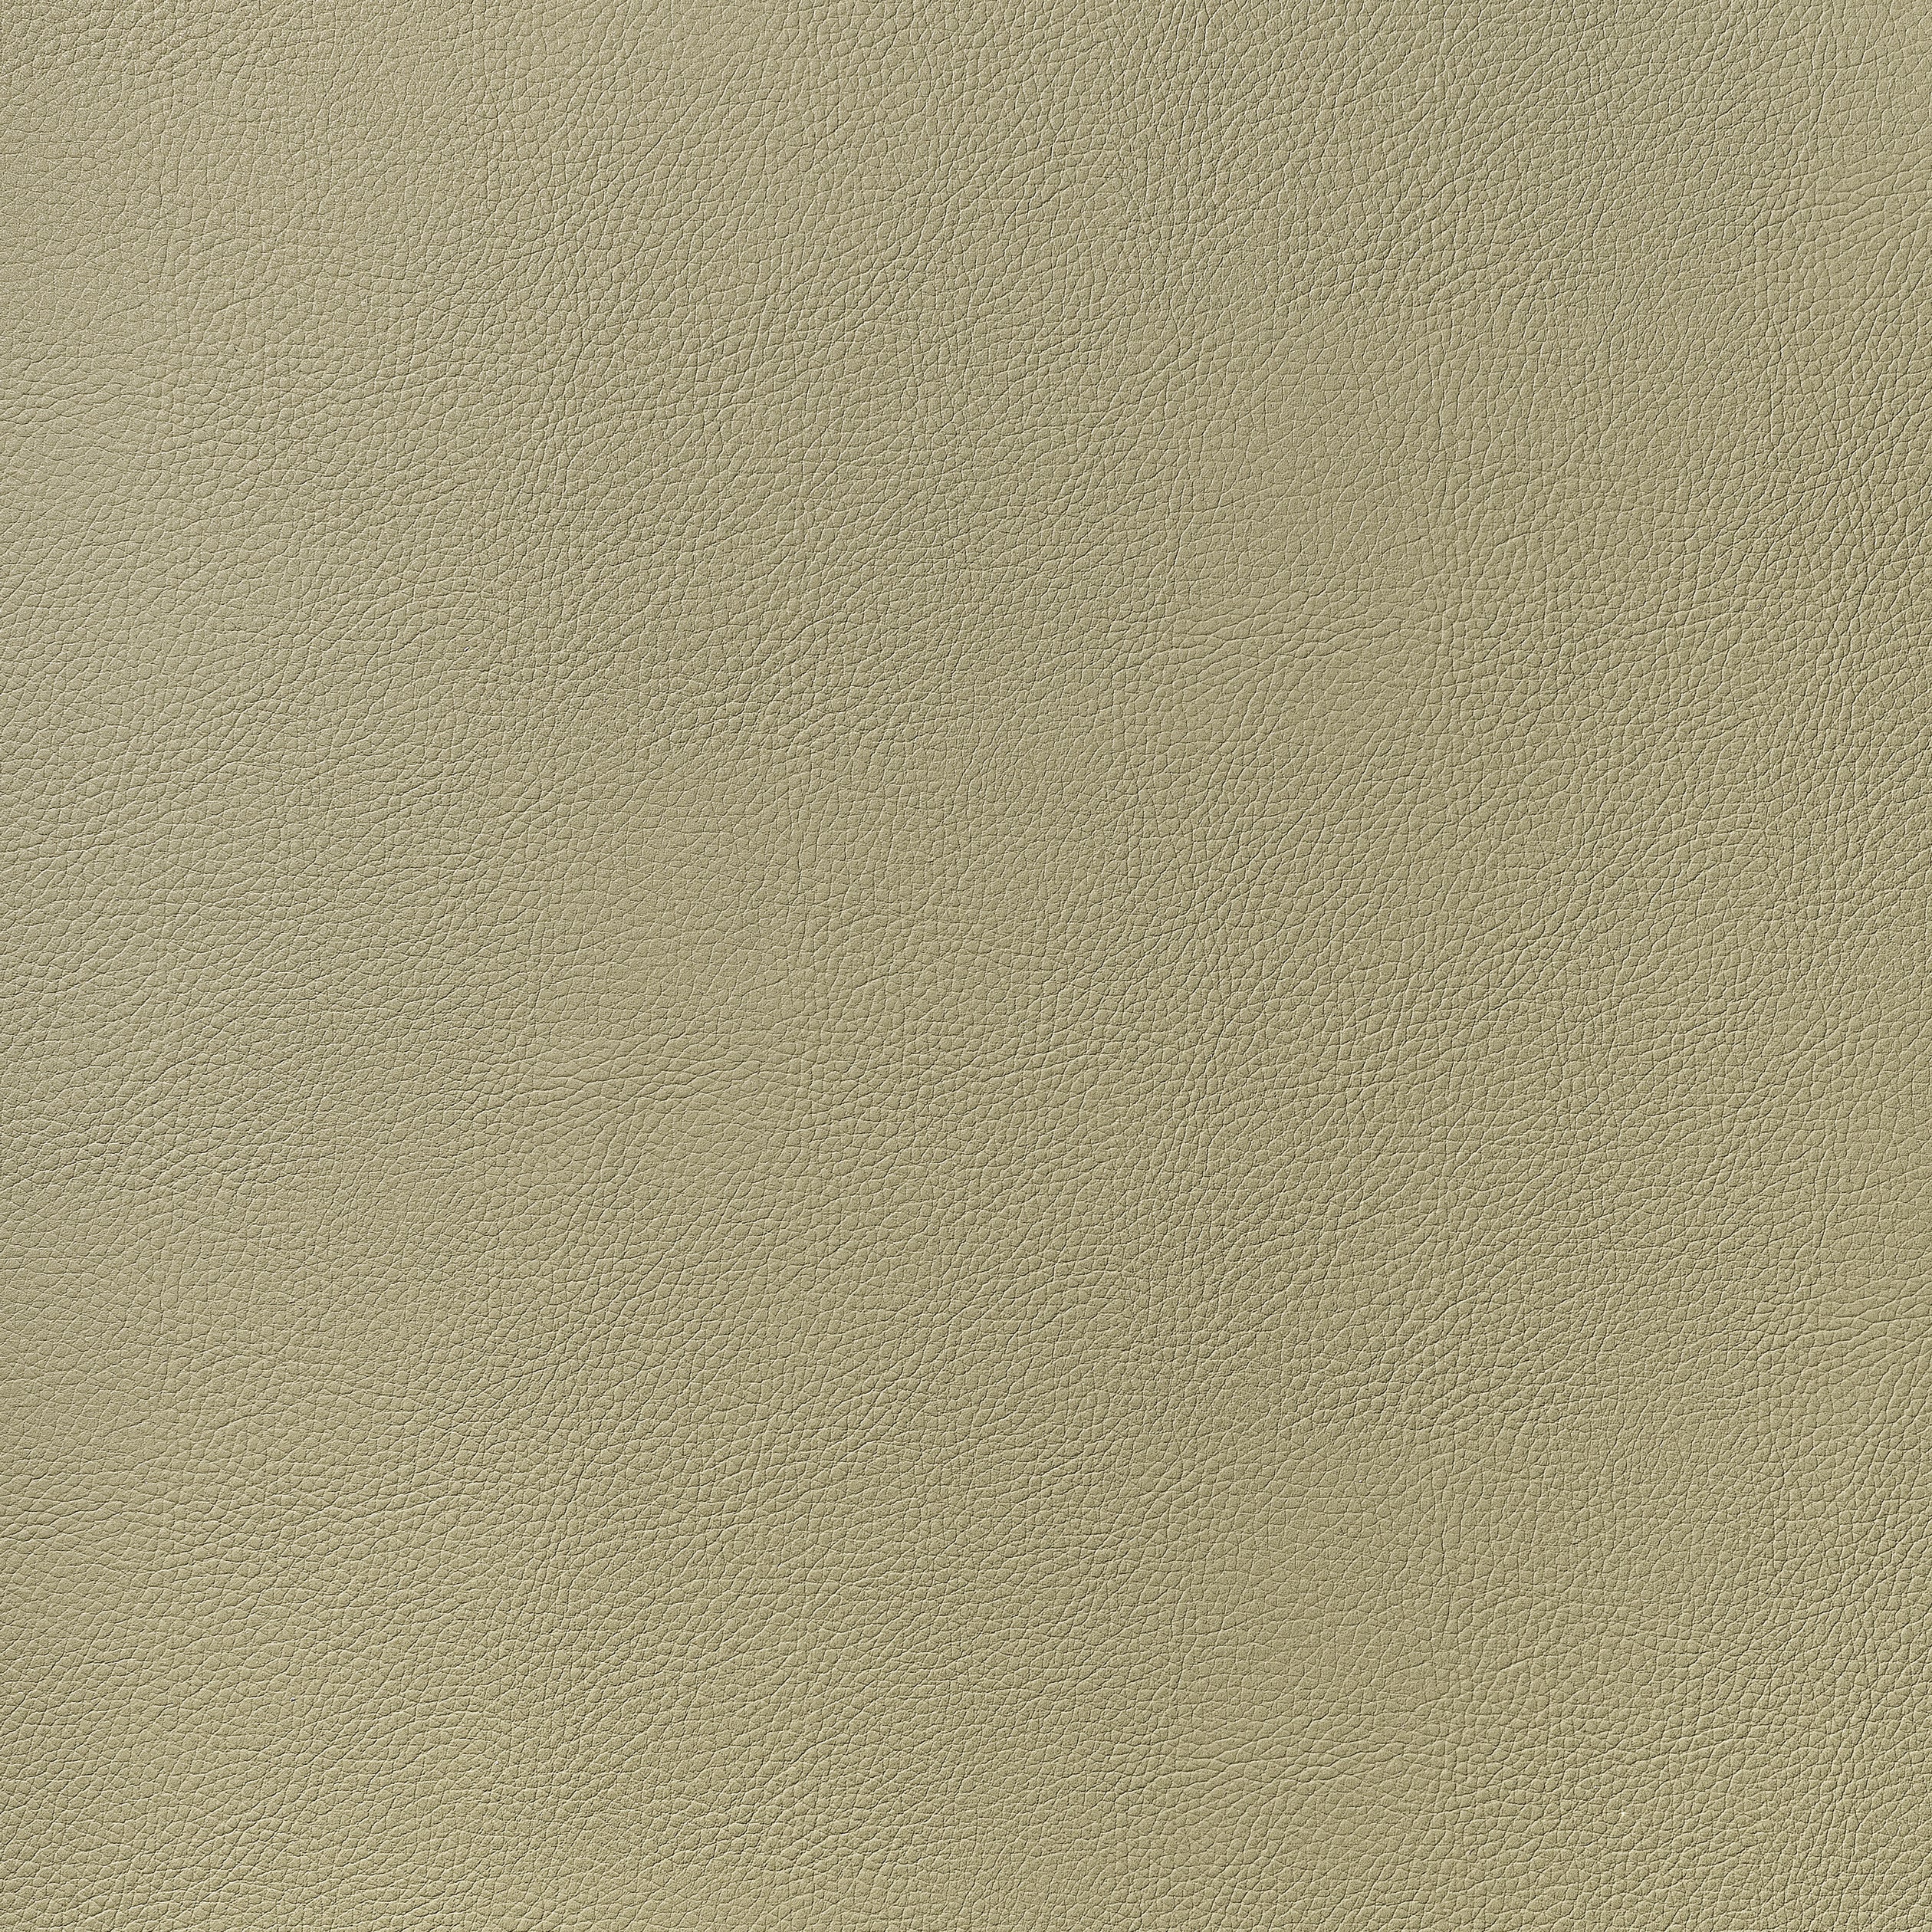 Arcata fabric in twig color - pattern number W78385 - by Thibaut in the  Sierra collection